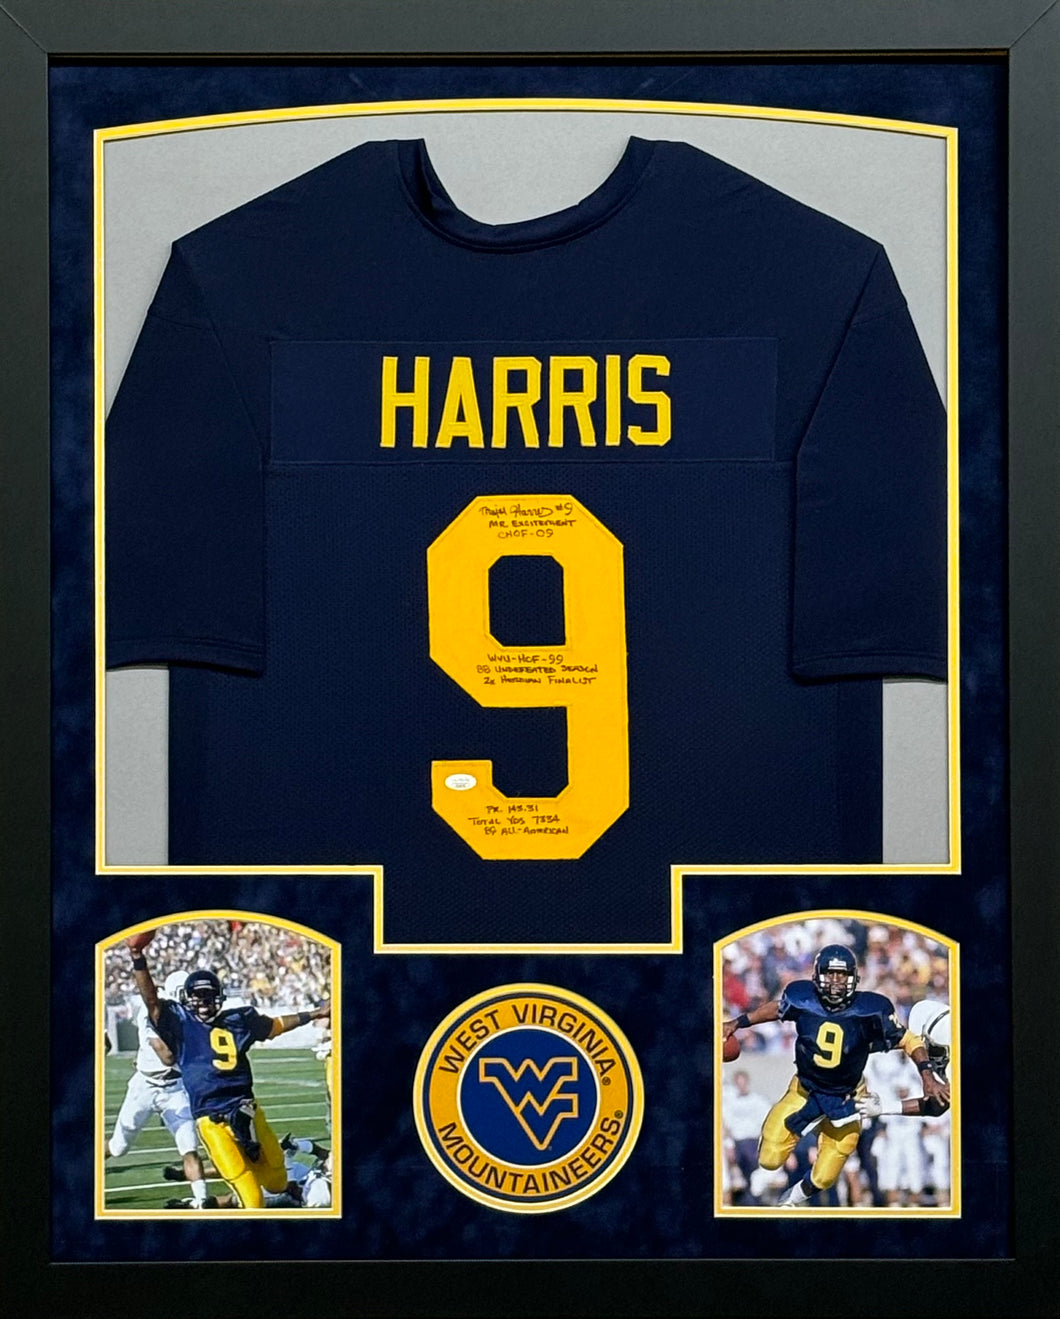 West Virginia Mountaineers Major Harris Signed Blue Jersey with Multiple Inscriptions Framed & Suede Matted with JSA COA